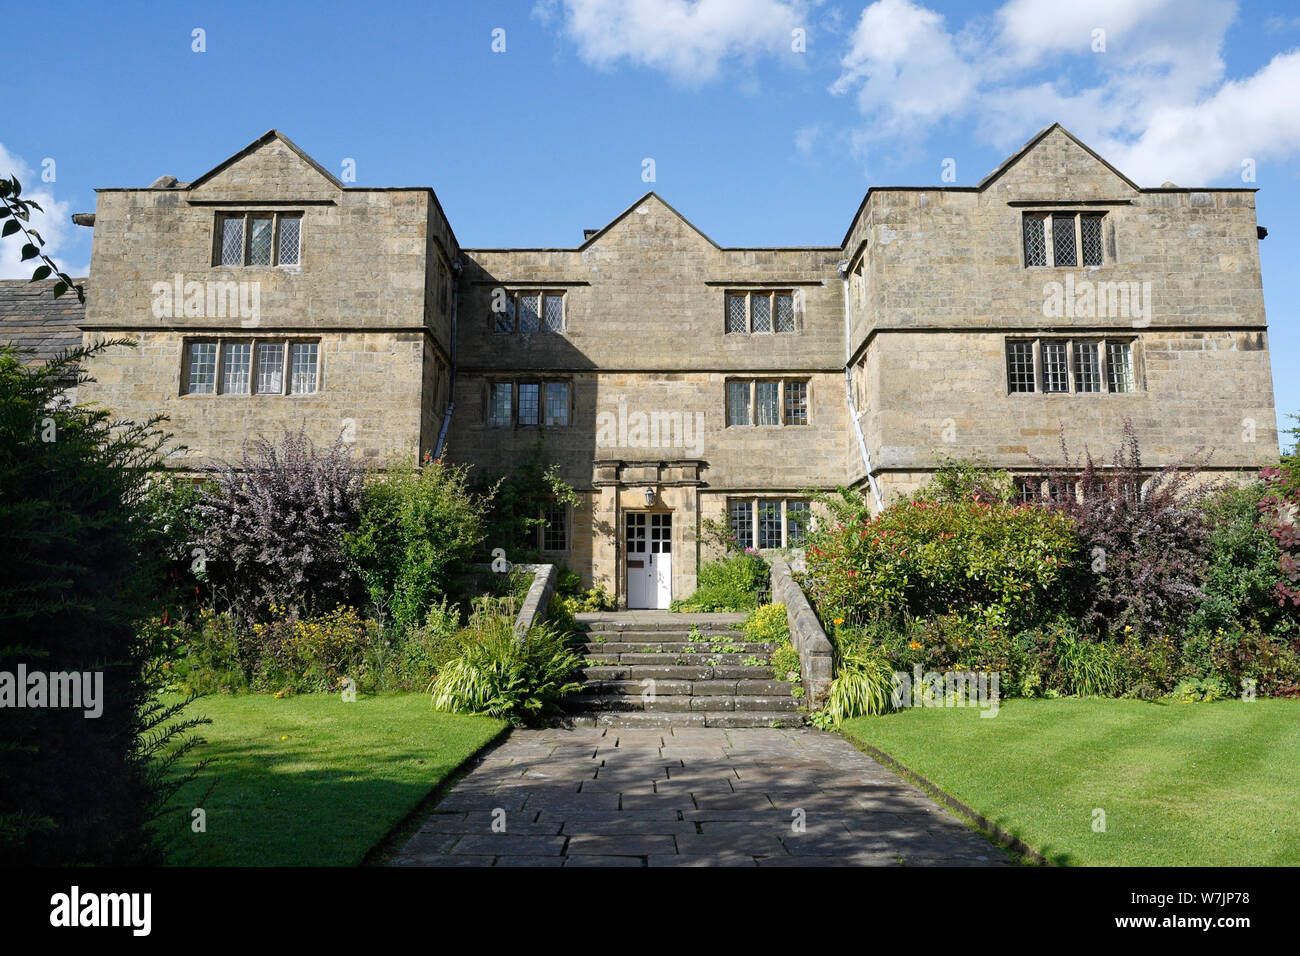 Eyam Hall in Derbyshire England UK, Historic English manor house. Listed building in the Peak District National Park, Jacobean period Stock Photo